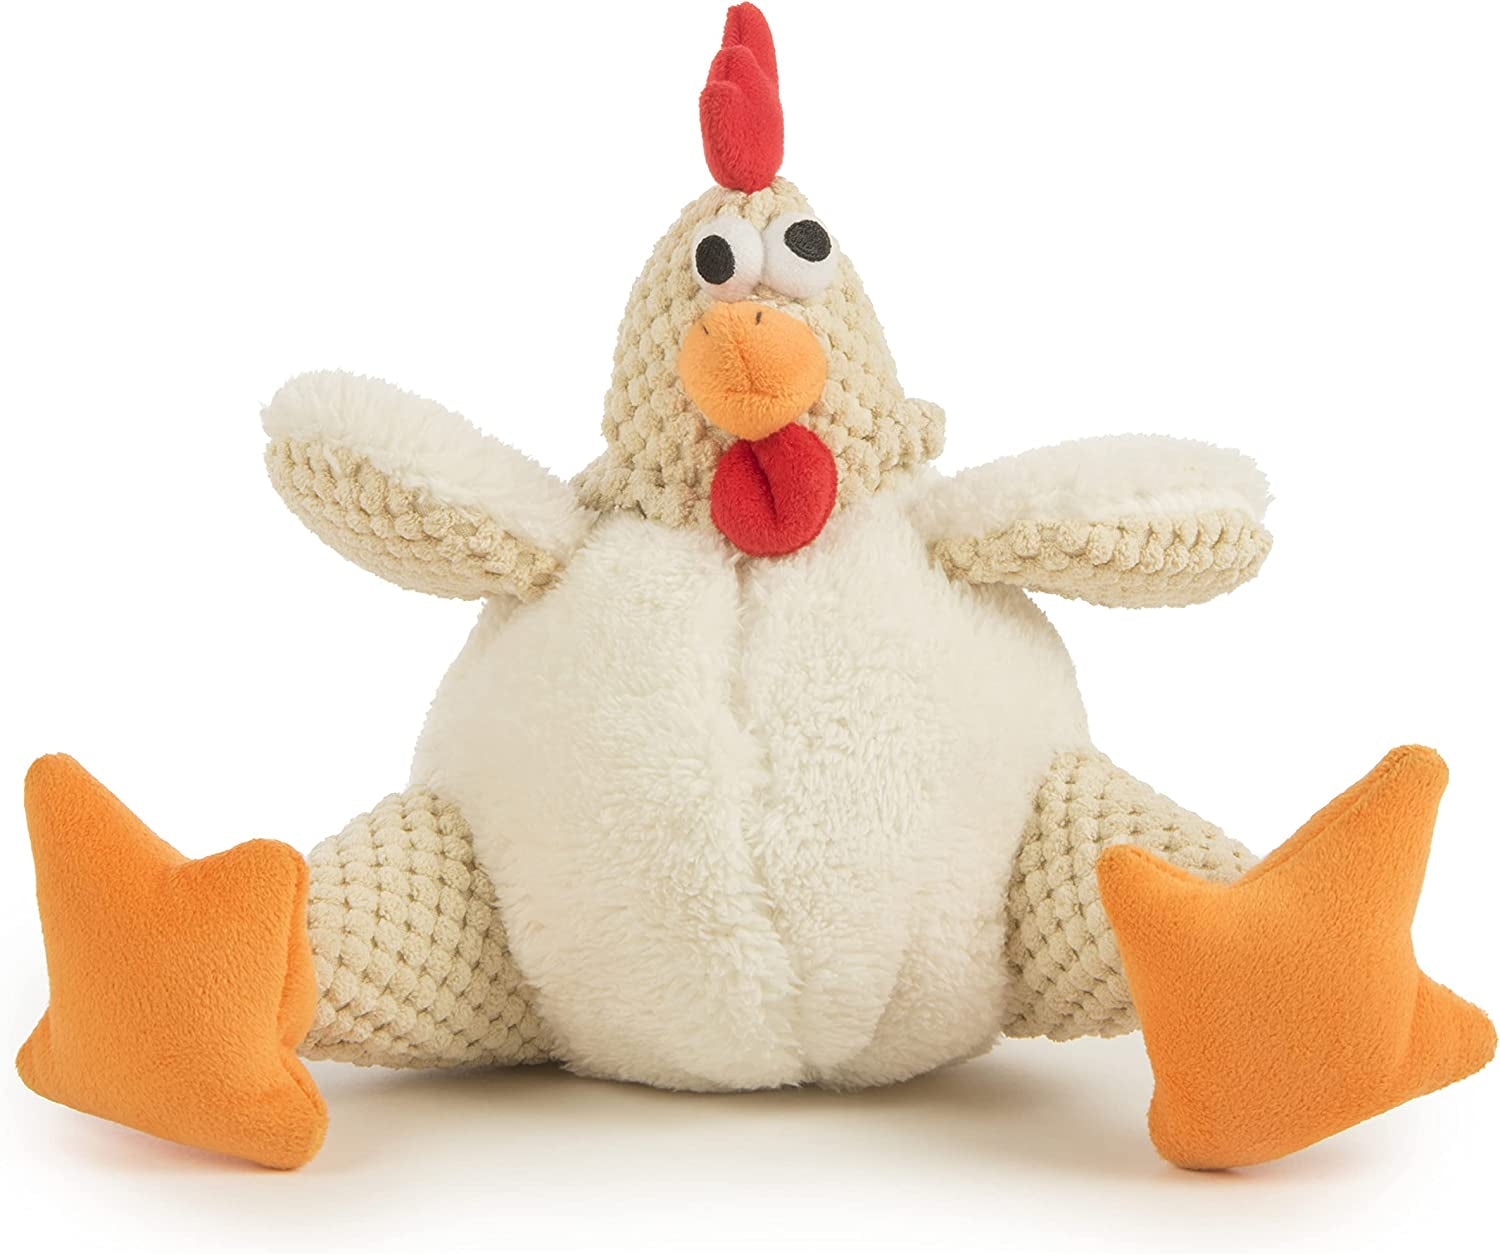 Checkers Fat Rooster Squeaky Plush Dog Toy, Chew Guard Technology - White, Large